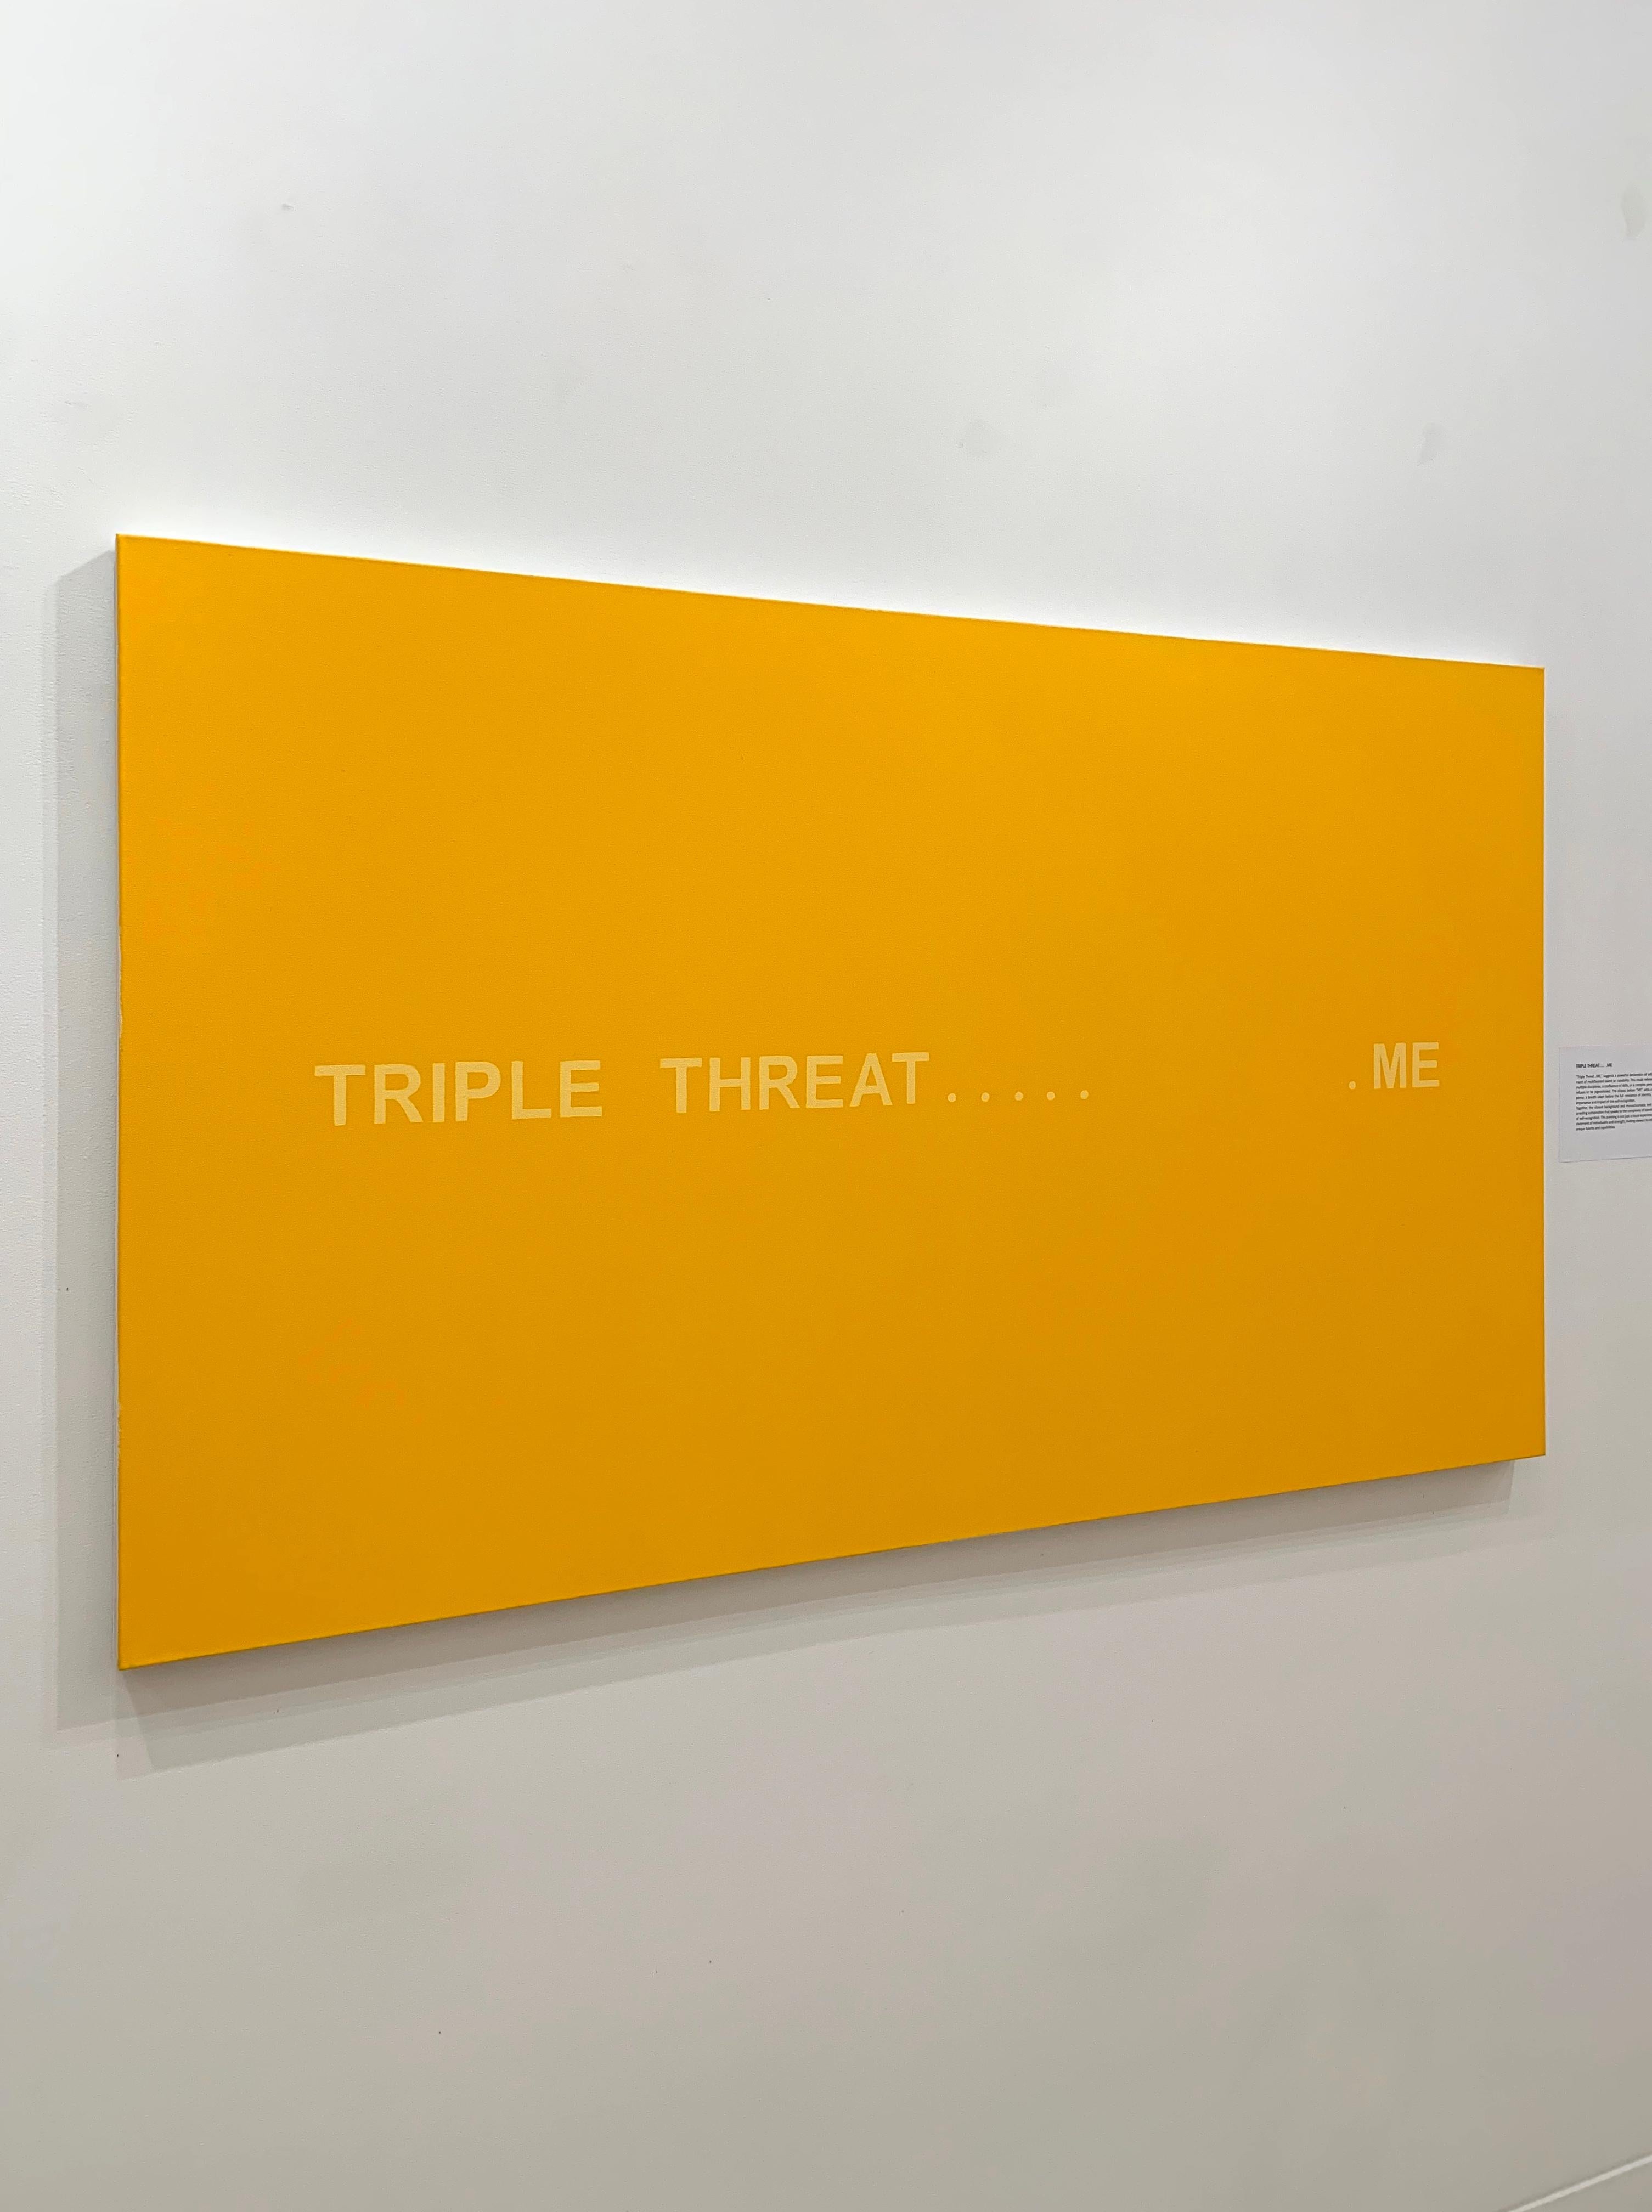 TRIPLE THREAT… ME - Conceptual Painting by Stephen Bezas